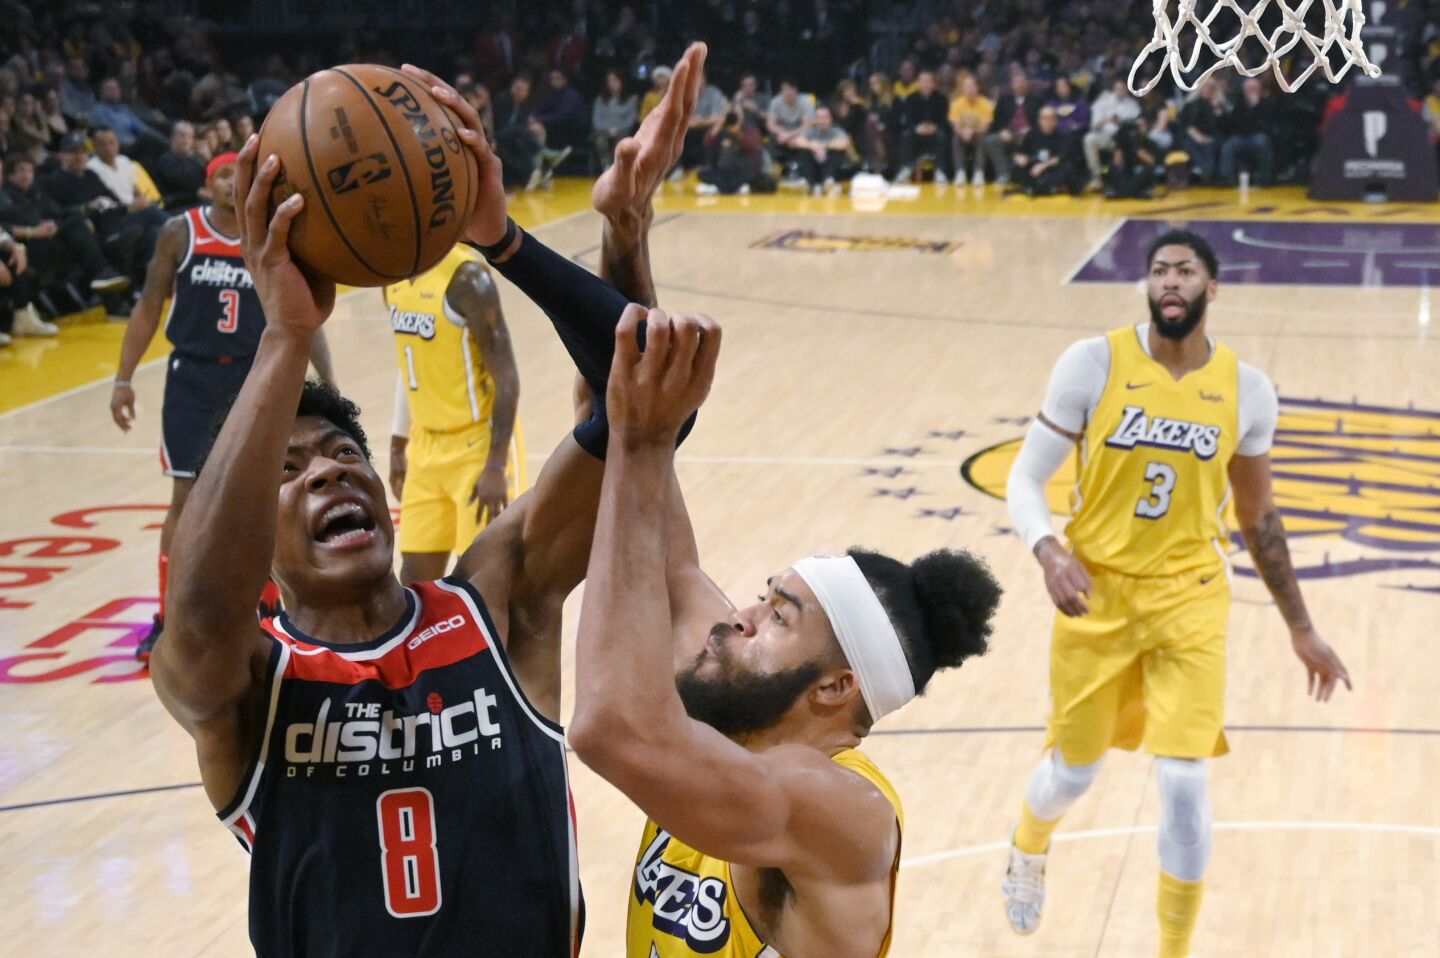 Wizards forward Rui Hachimura puts up a shot against Lakers center JaVale McGee during the first half of a game Nov. 29 at Staples Center.